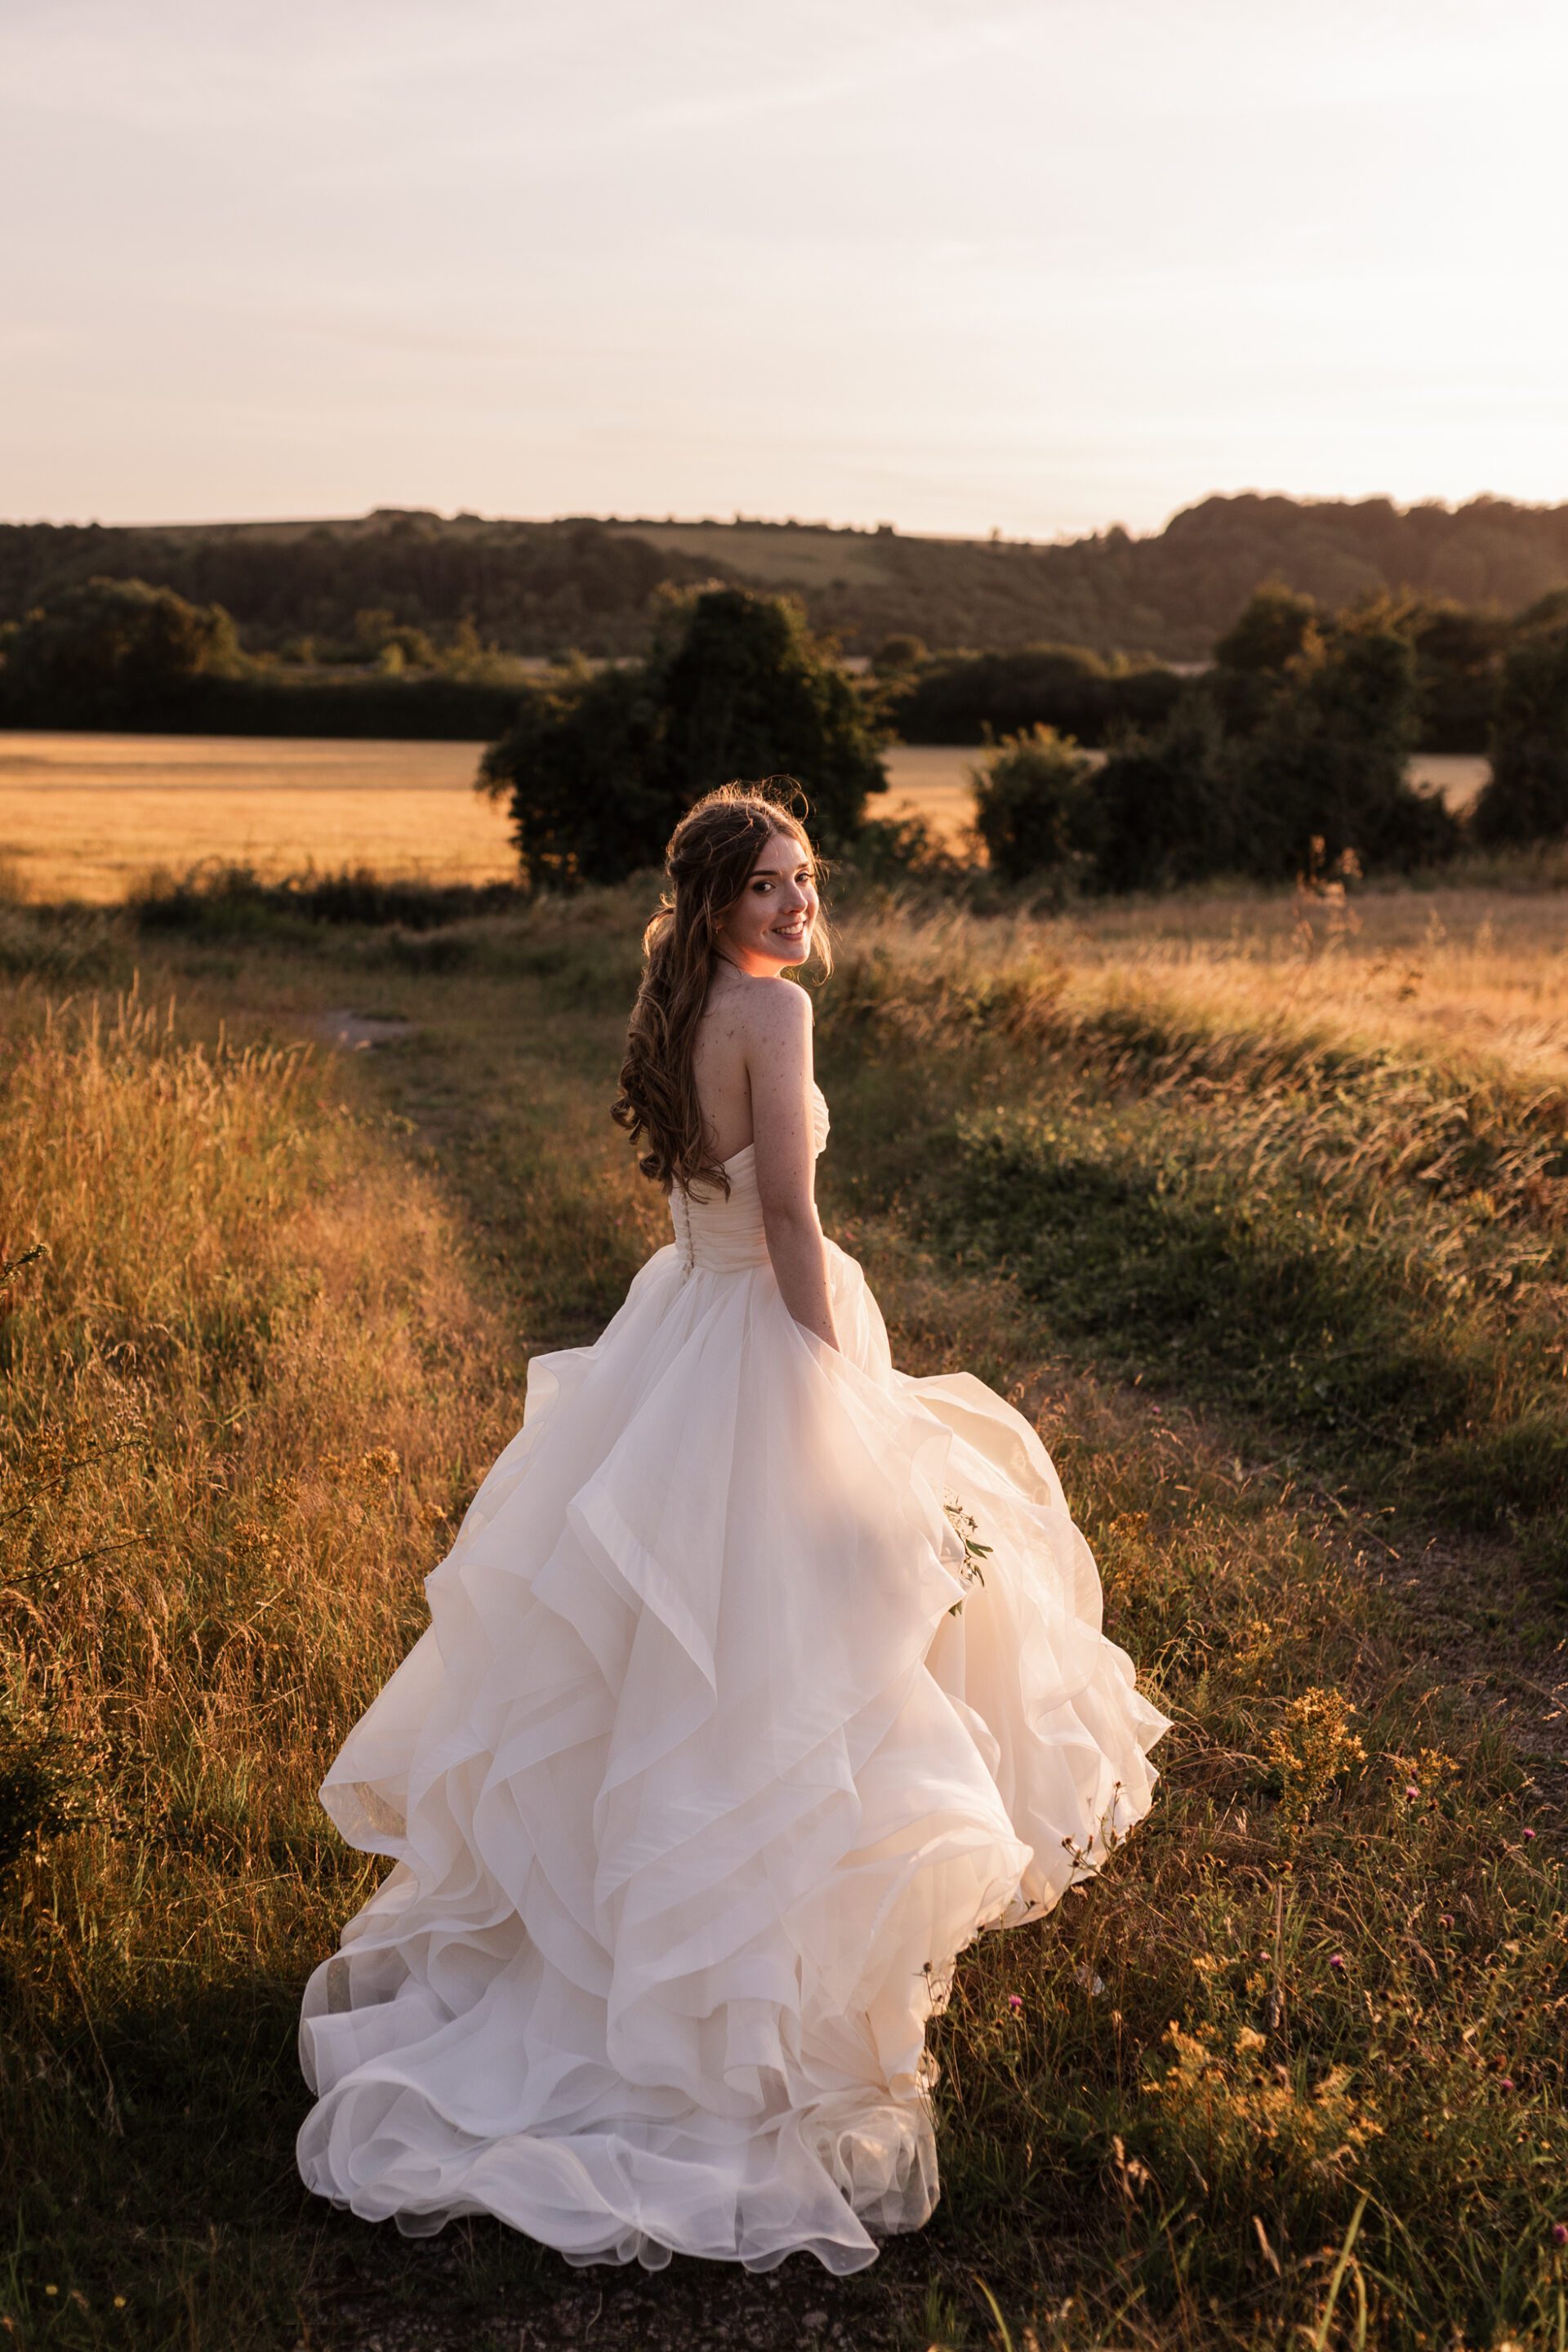 Editorial wedding photography from the Falkenburgs